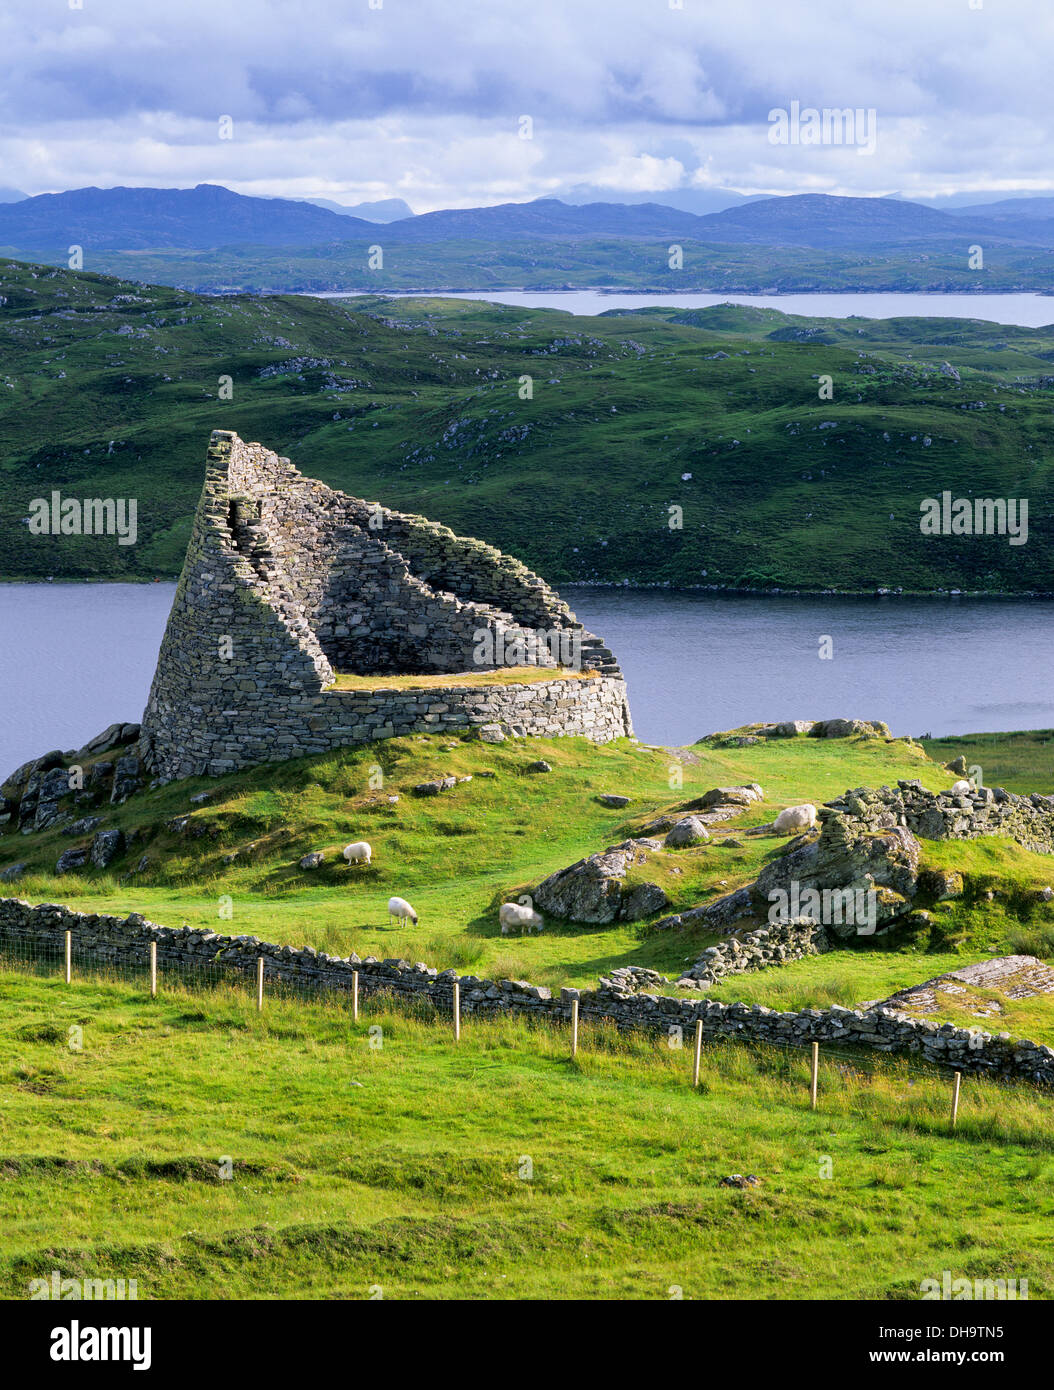 Dun Carloway. Broch on the Isle of Lewis, Outer Hebrides, Western Isles, Scotland, UK. Stock Photo